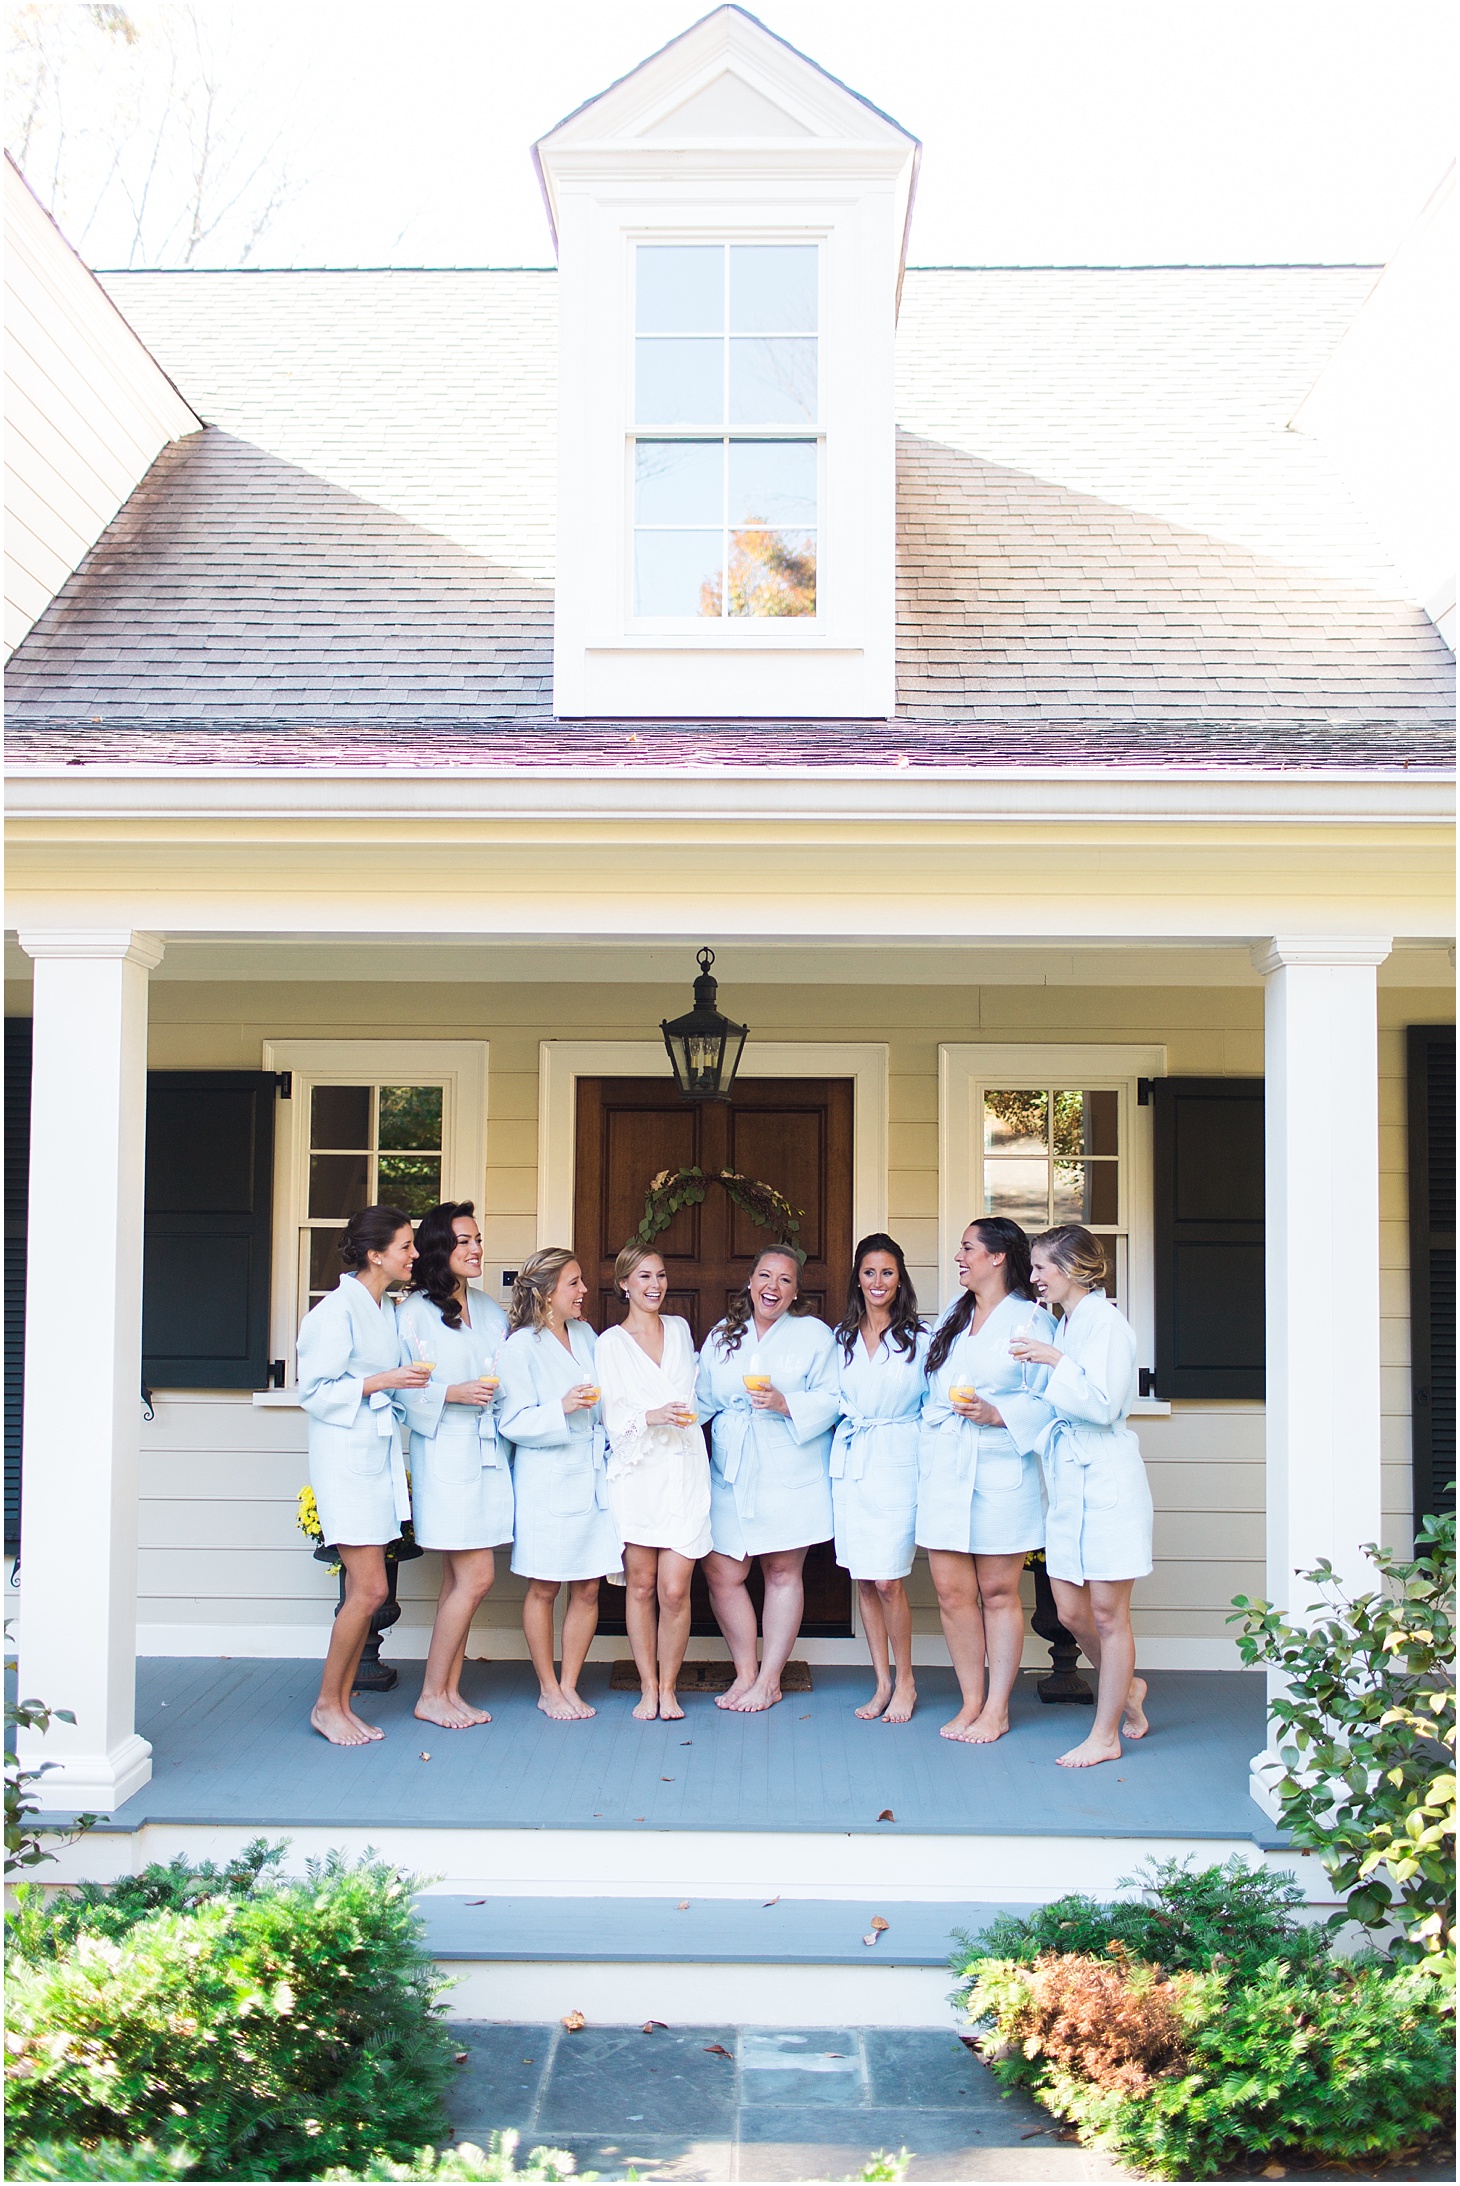 Bride and Bridesmaids Getting Ready | Wedding Ceremony at Old Presbyterian Meeting House | Southern Black Tie wedding at St. Regis DC in Dusty Blue and Ivory | Sarah Bradshaw Photography